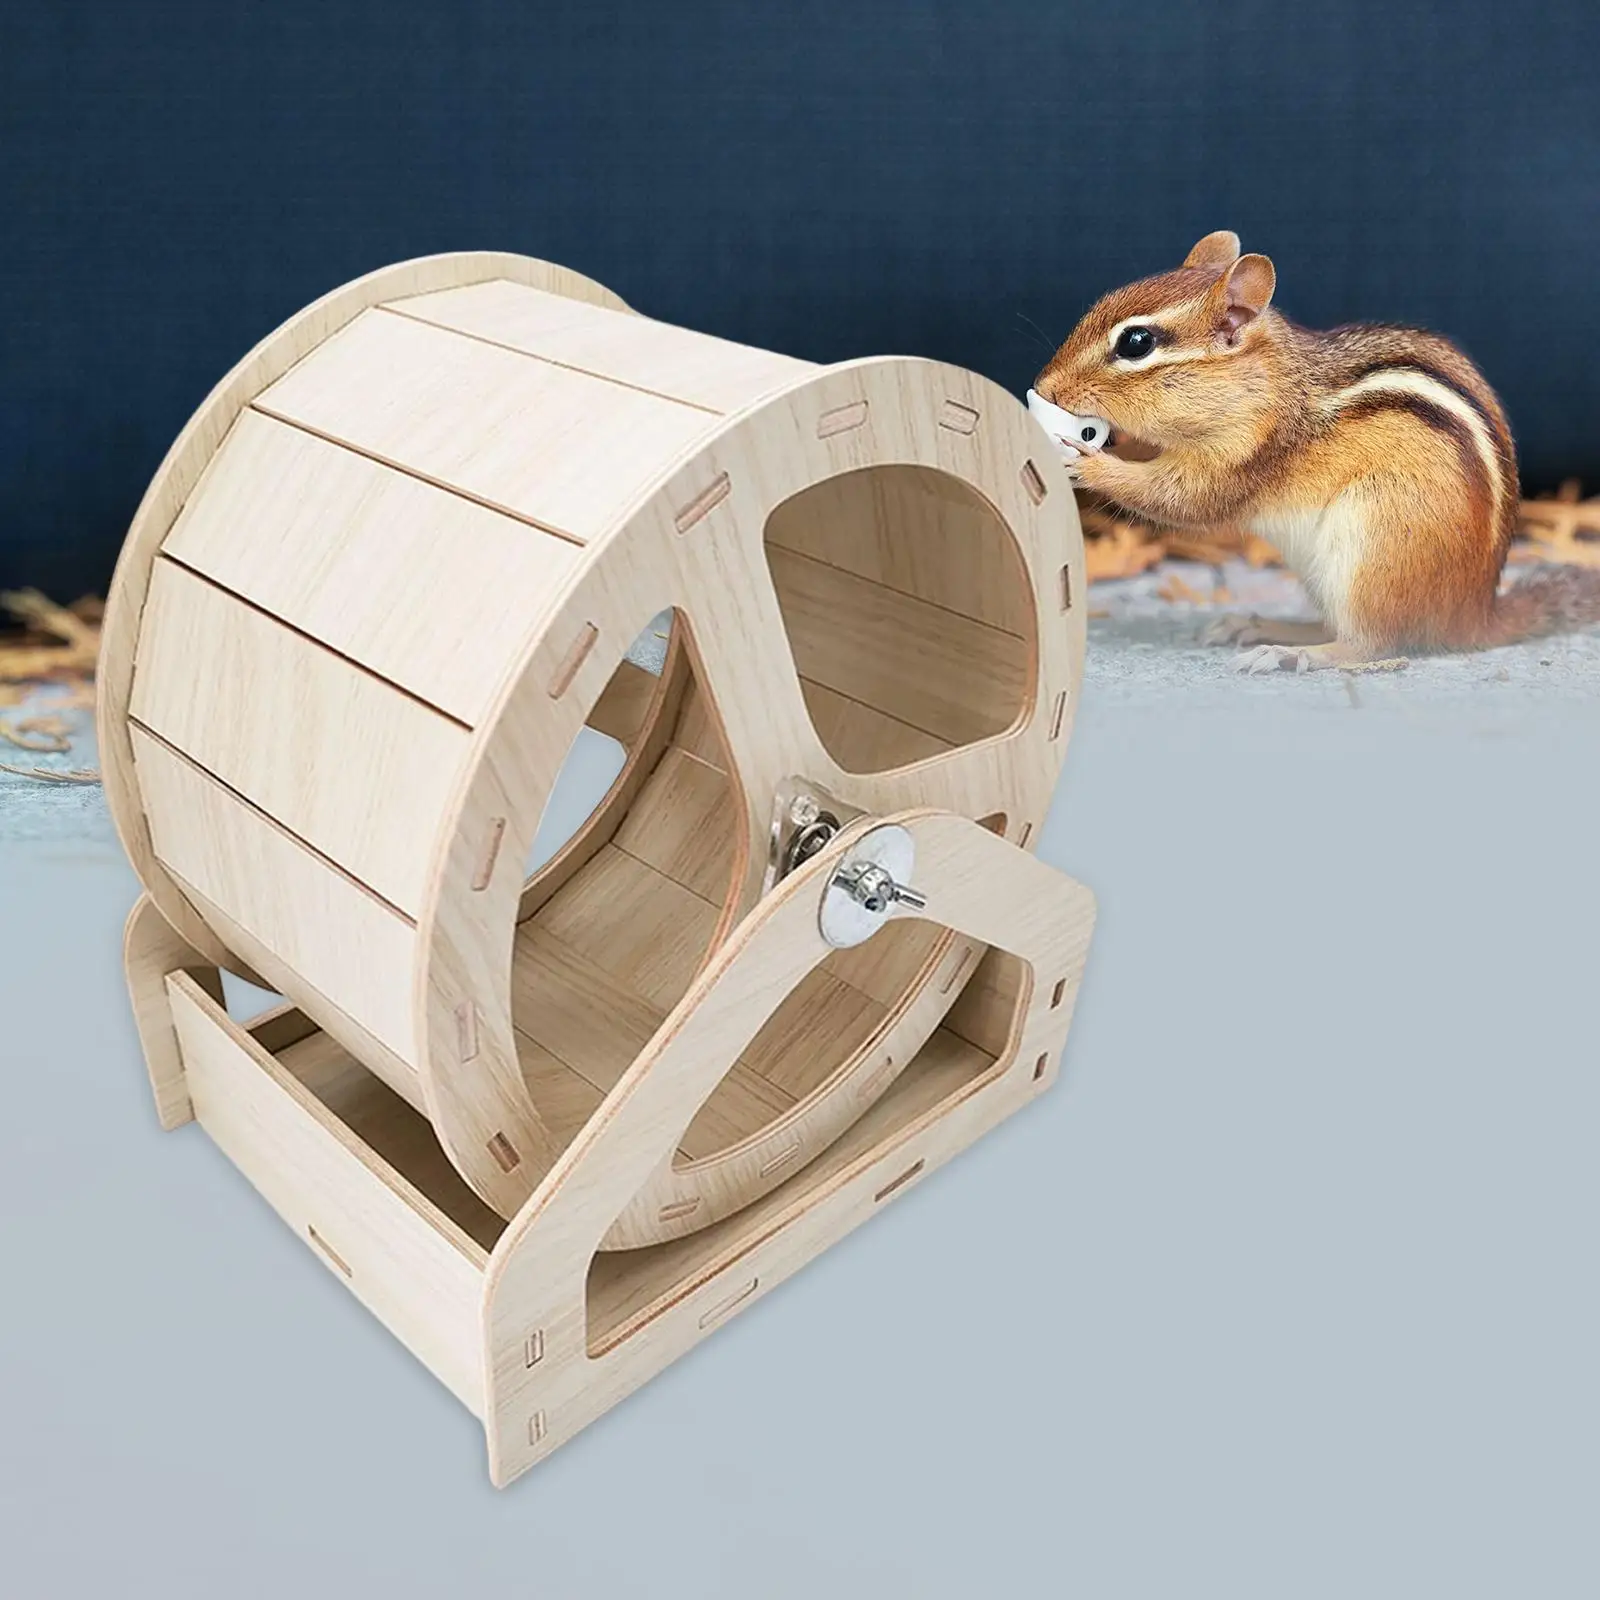 Quiet Hamster Running Wheels Exercise Toys Gerbils Small Chinchilla Mouse Indoor Round Wood Hamster Exercise Wheel Pet Supplies